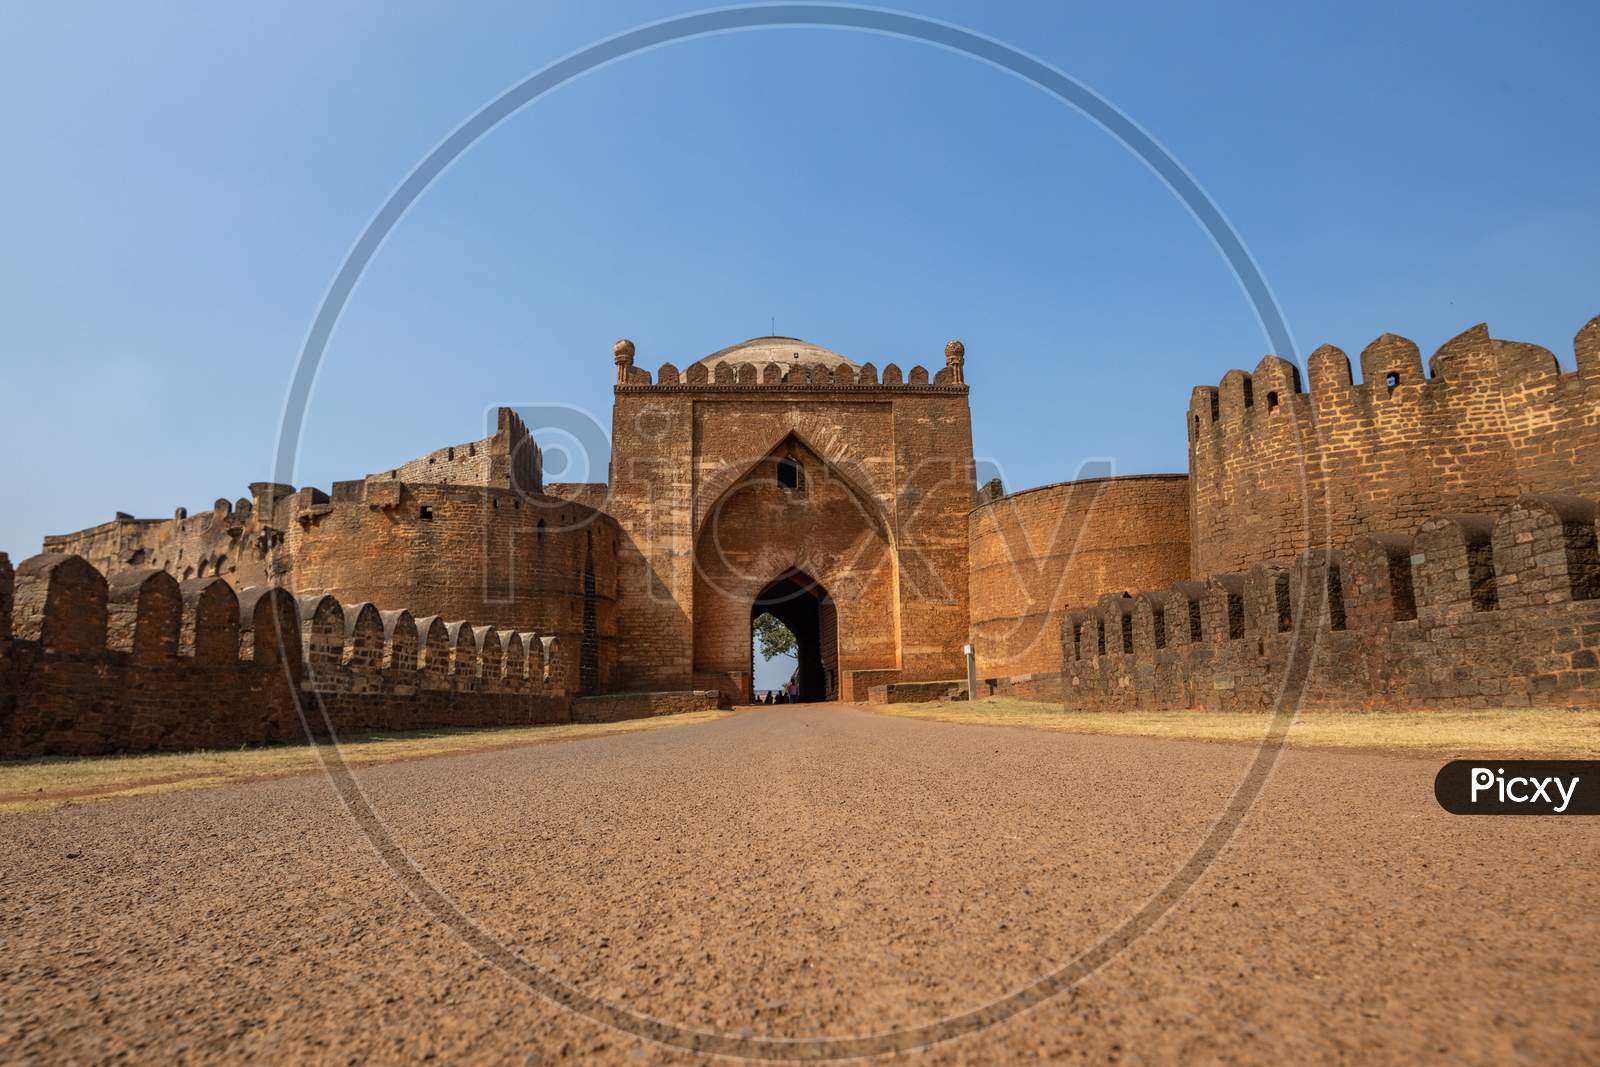 Low angle View of Bidar Fort Entrance